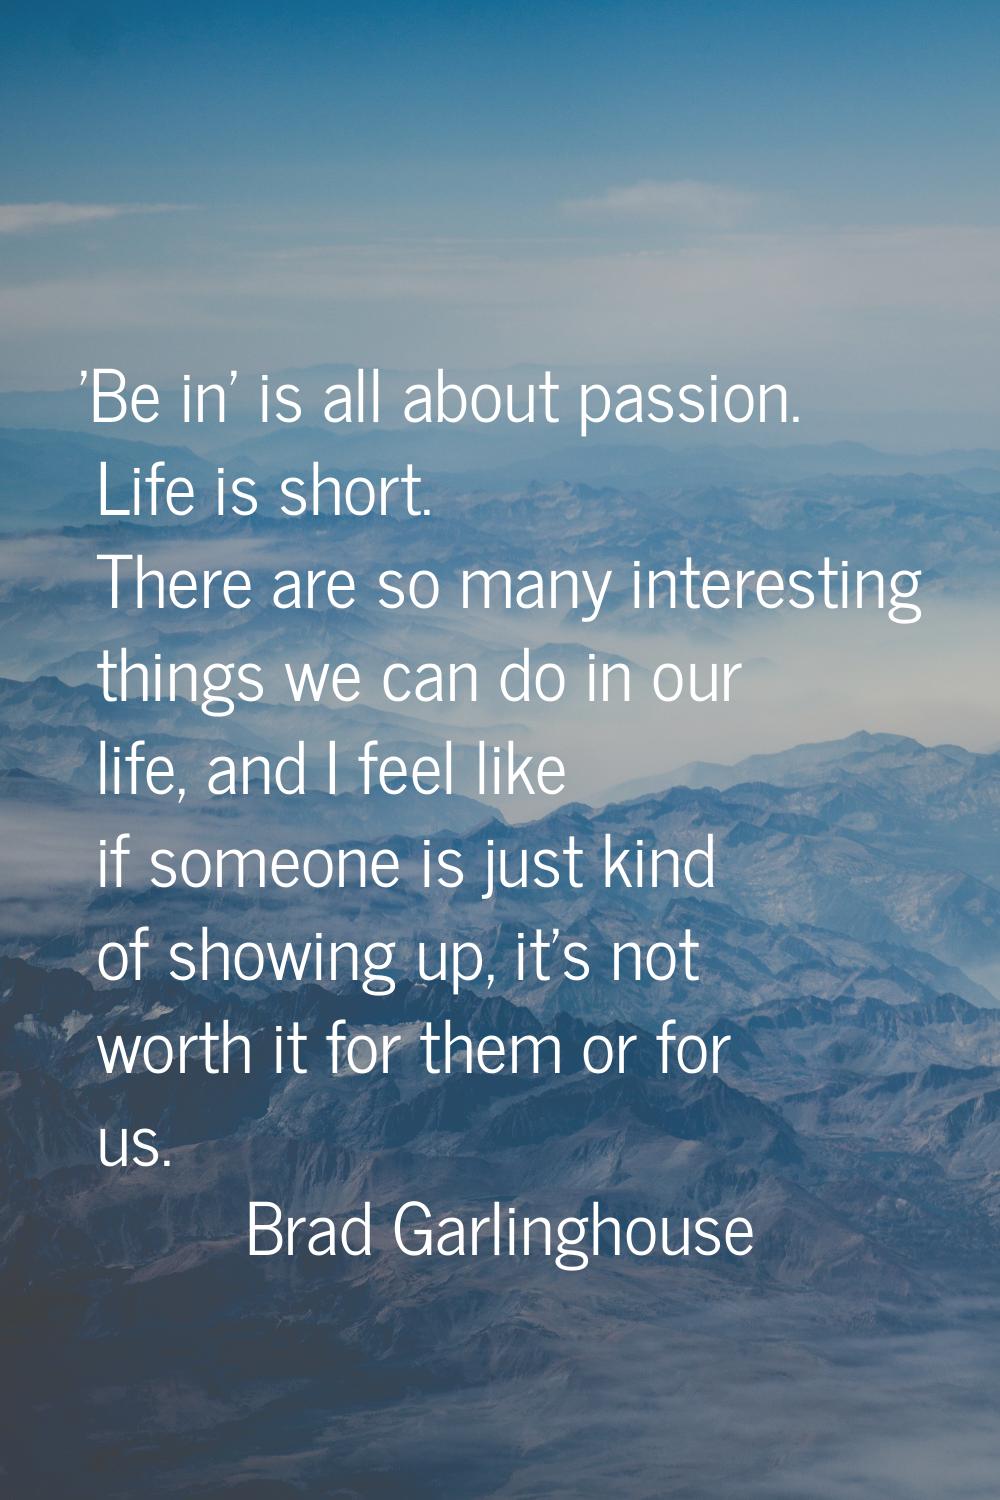 'Be in' is all about passion. Life is short. There are so many interesting things we can do in our 